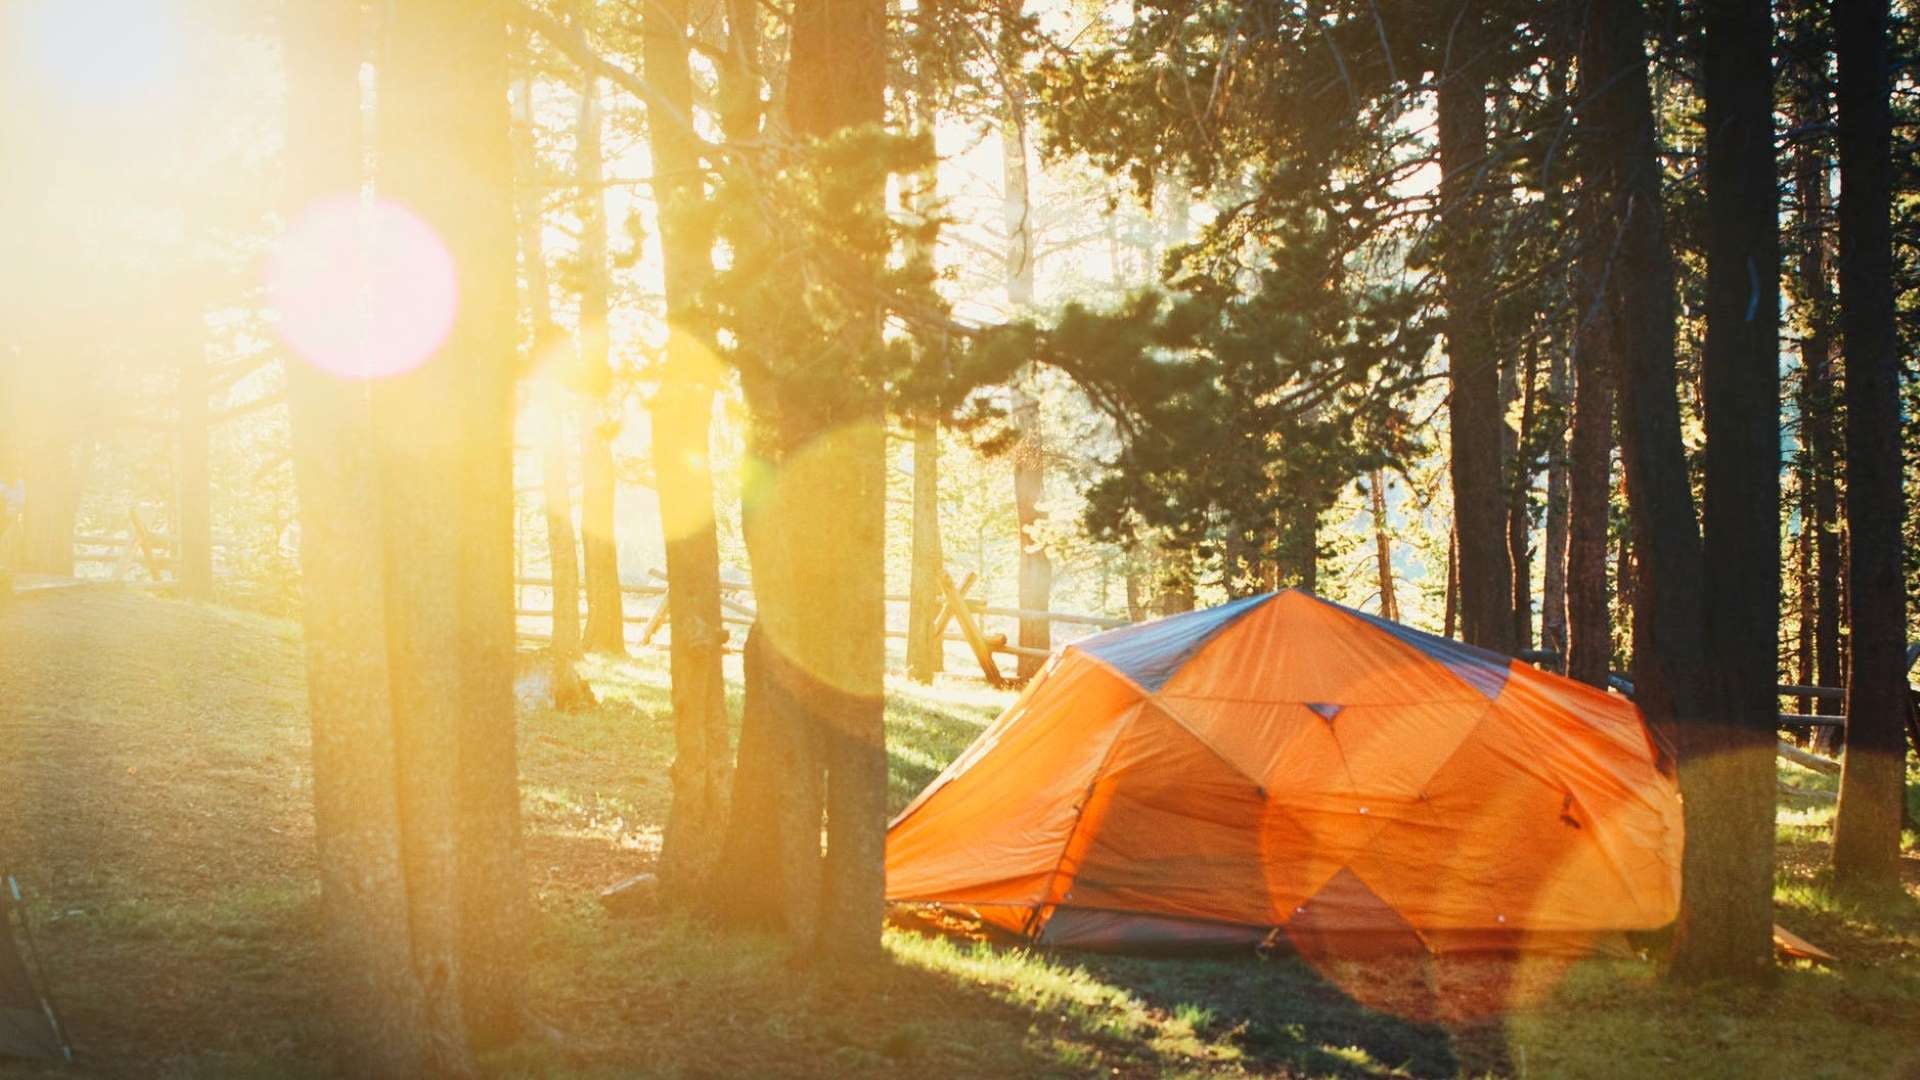 People in nature,Nature,Tent,Sunlight,Light,Natural environment,Morning,Orange,Tree,Yellow